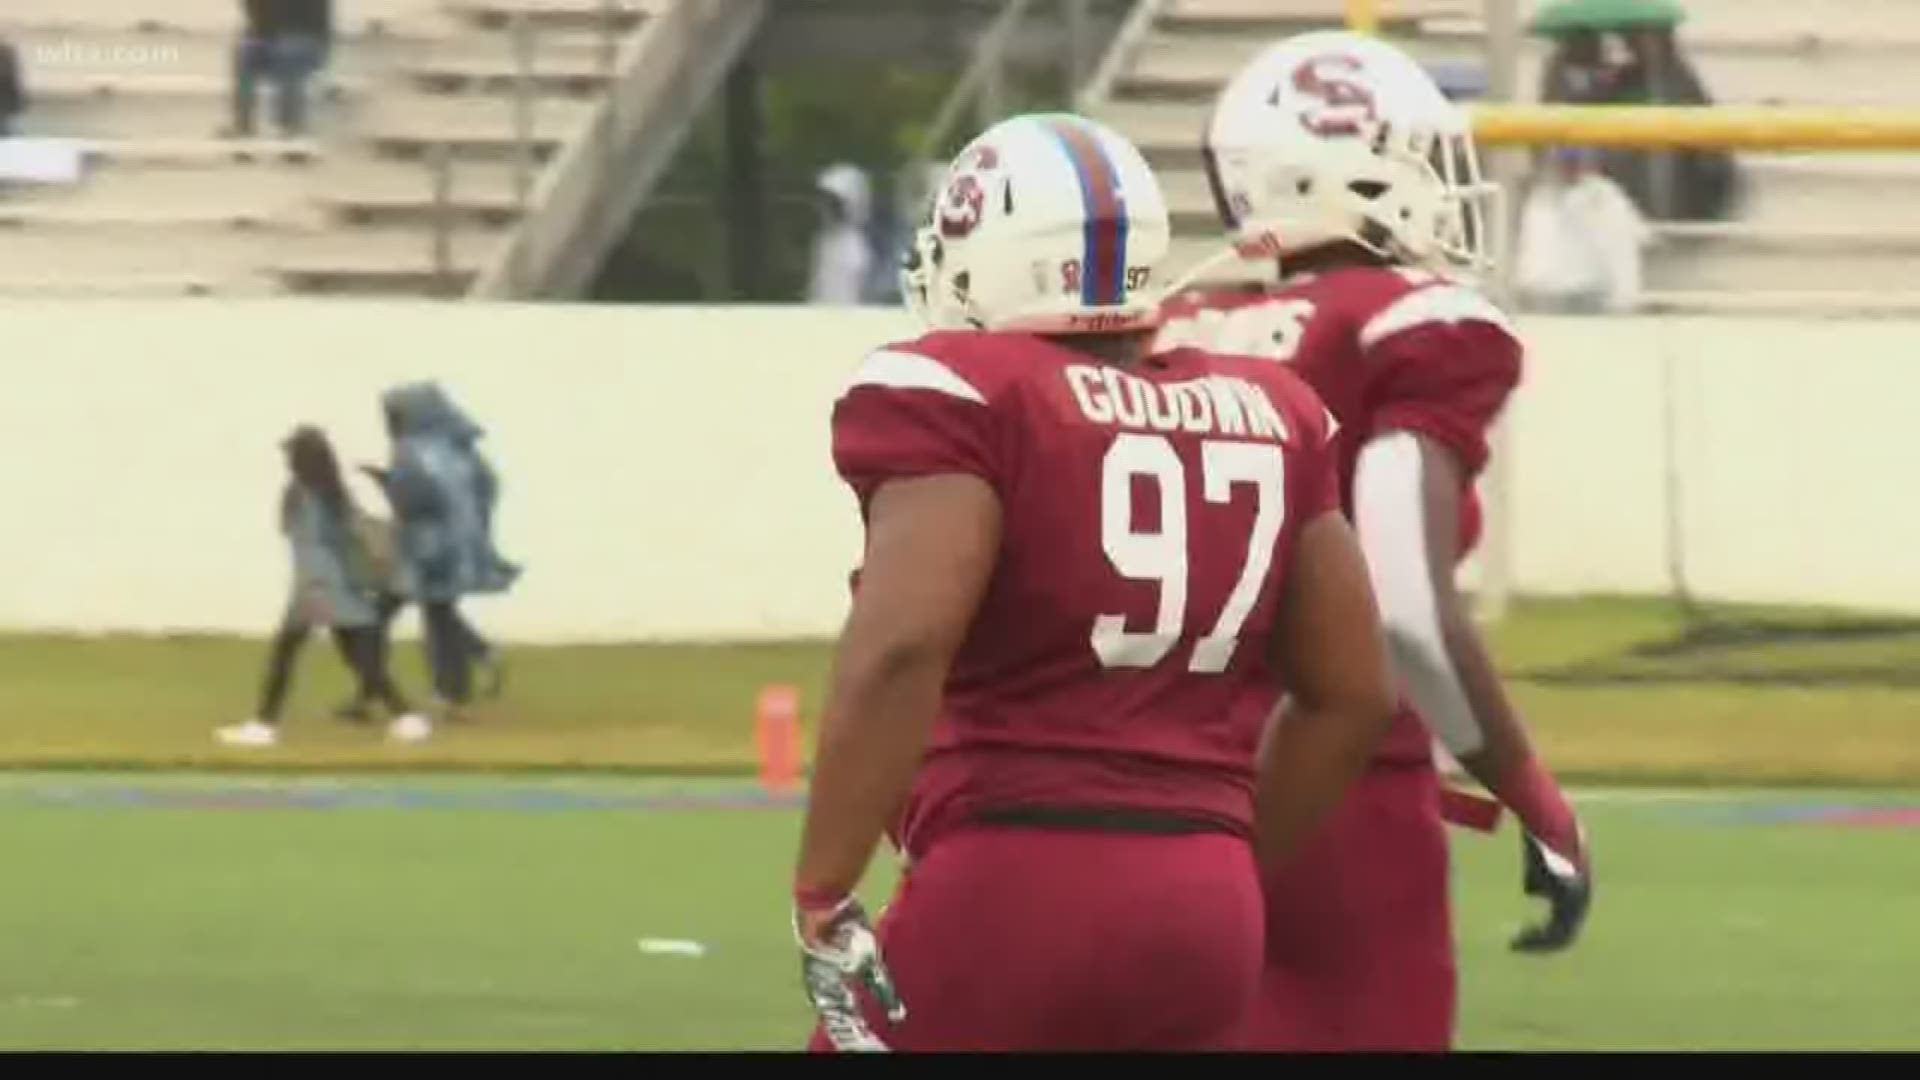 South Carolina State defensive lineman Tyrell Goodwin comes from humble beginning that he refers to as "the gutter".